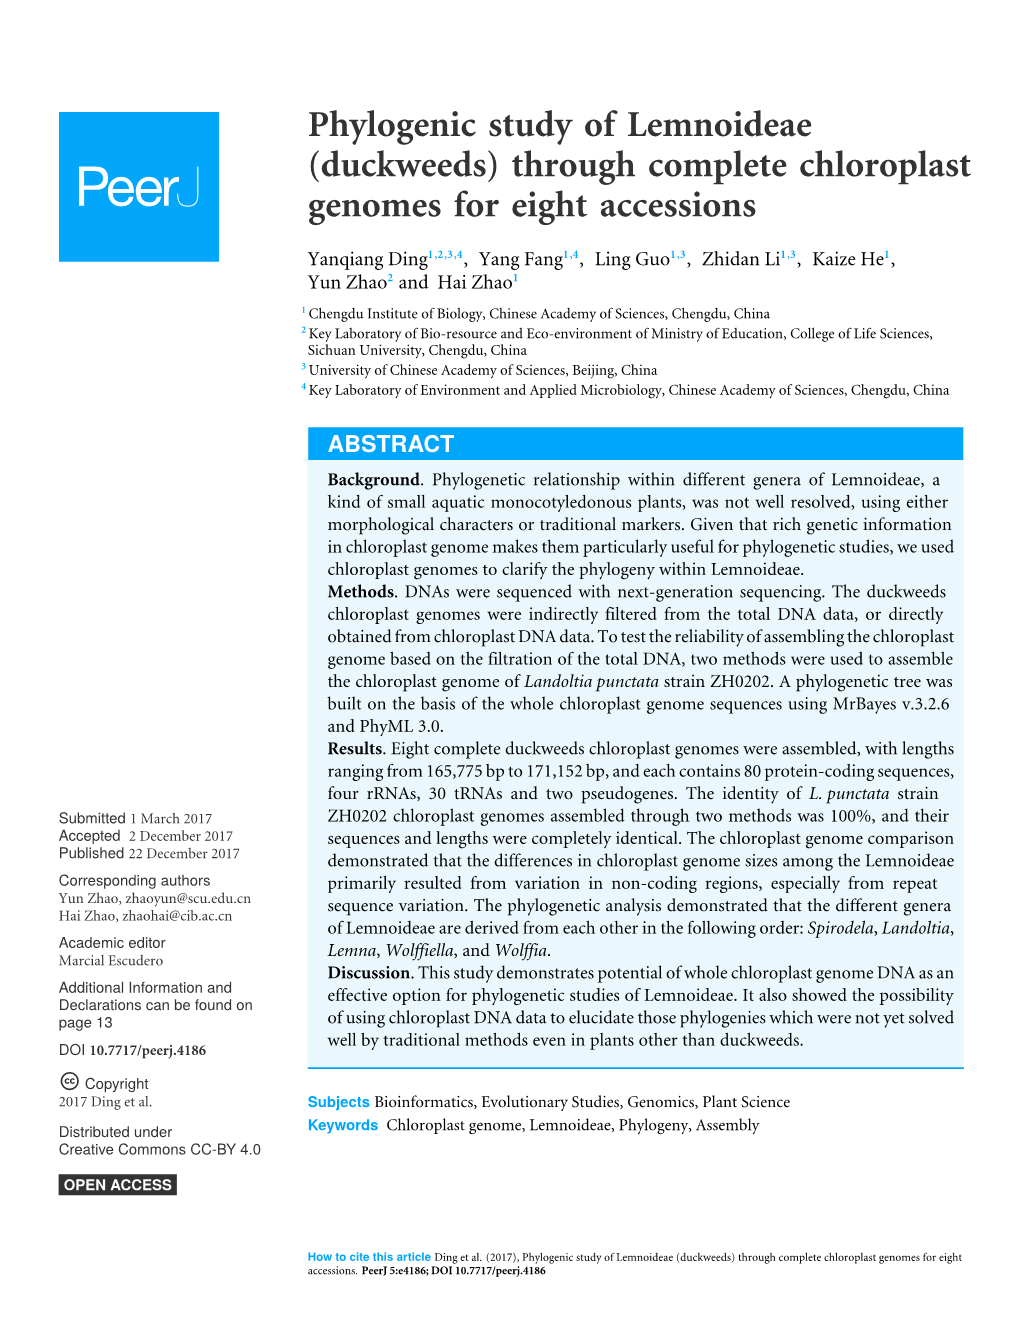 Phylogenic Study of Lemnoideae (Duckweeds) Through Complete Chloroplast Genomes for Eight Accessions